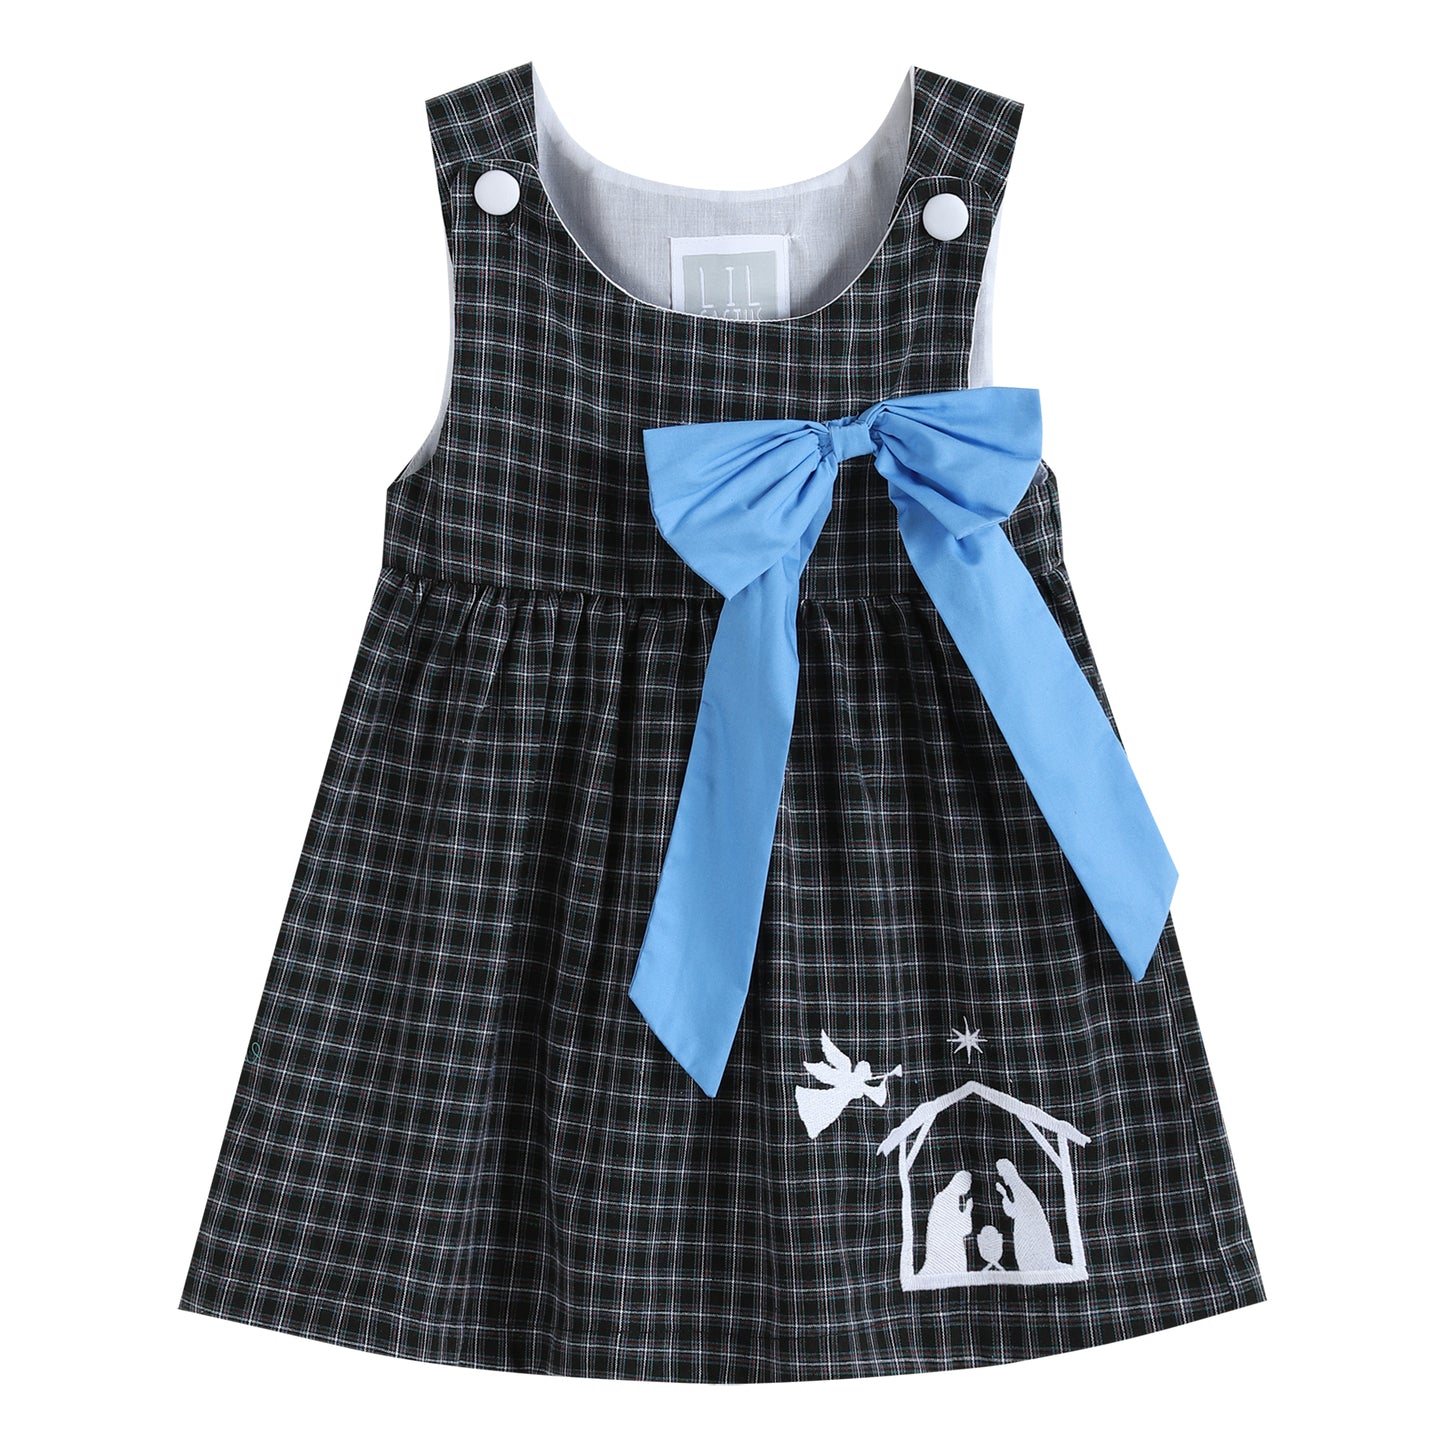 Black and White Nativity A-Line Dress with Blue Bow